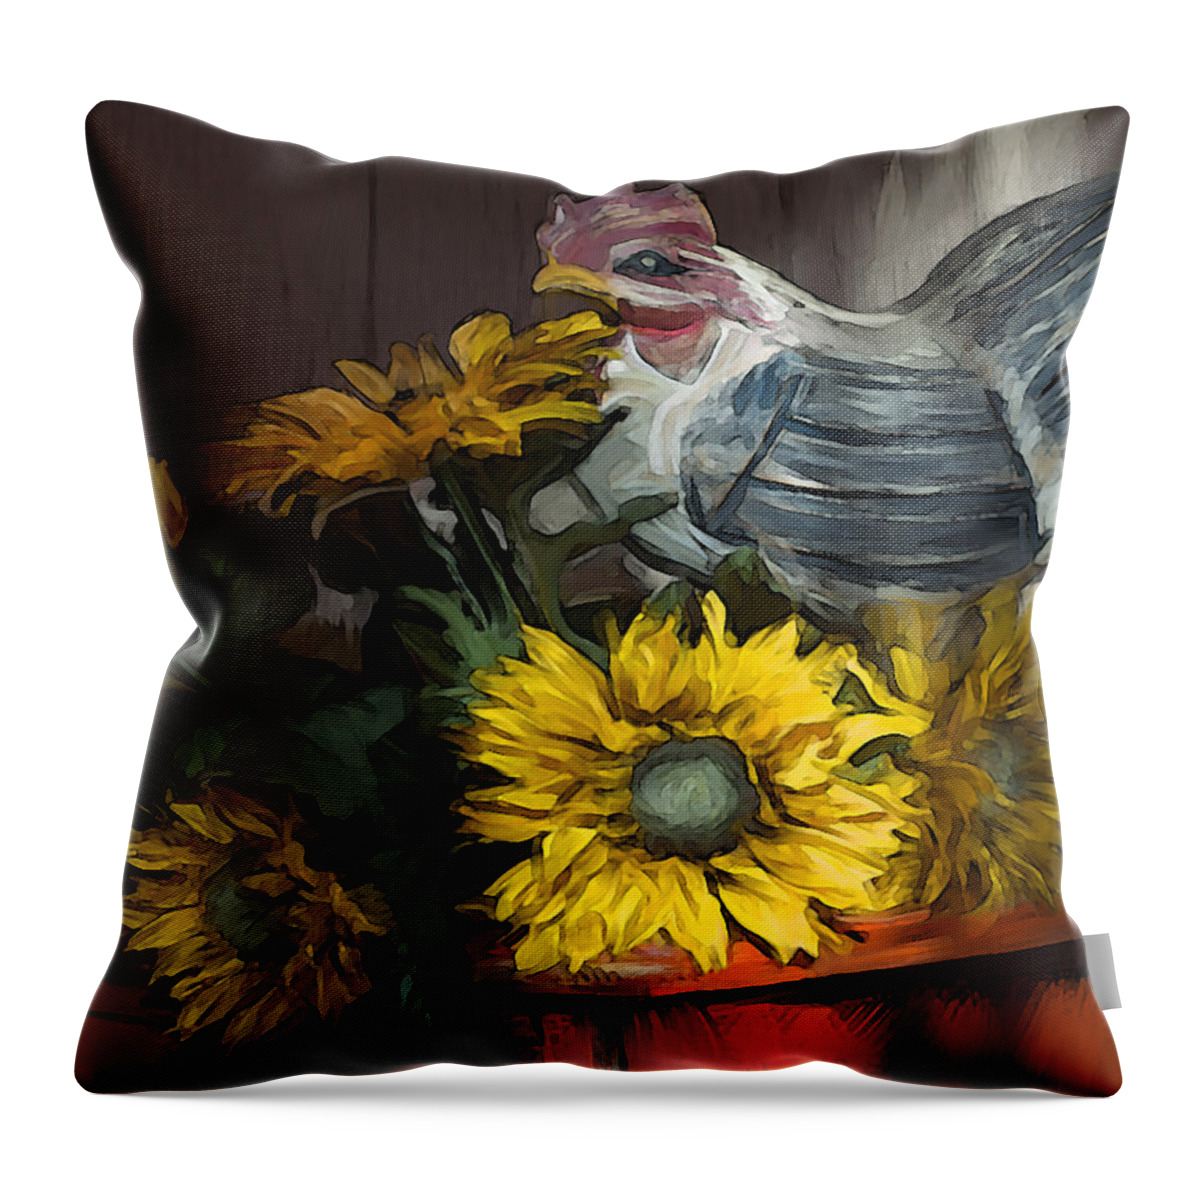 Watercolor Throw Pillow featuring the photograph Country Table by Dave Sandt